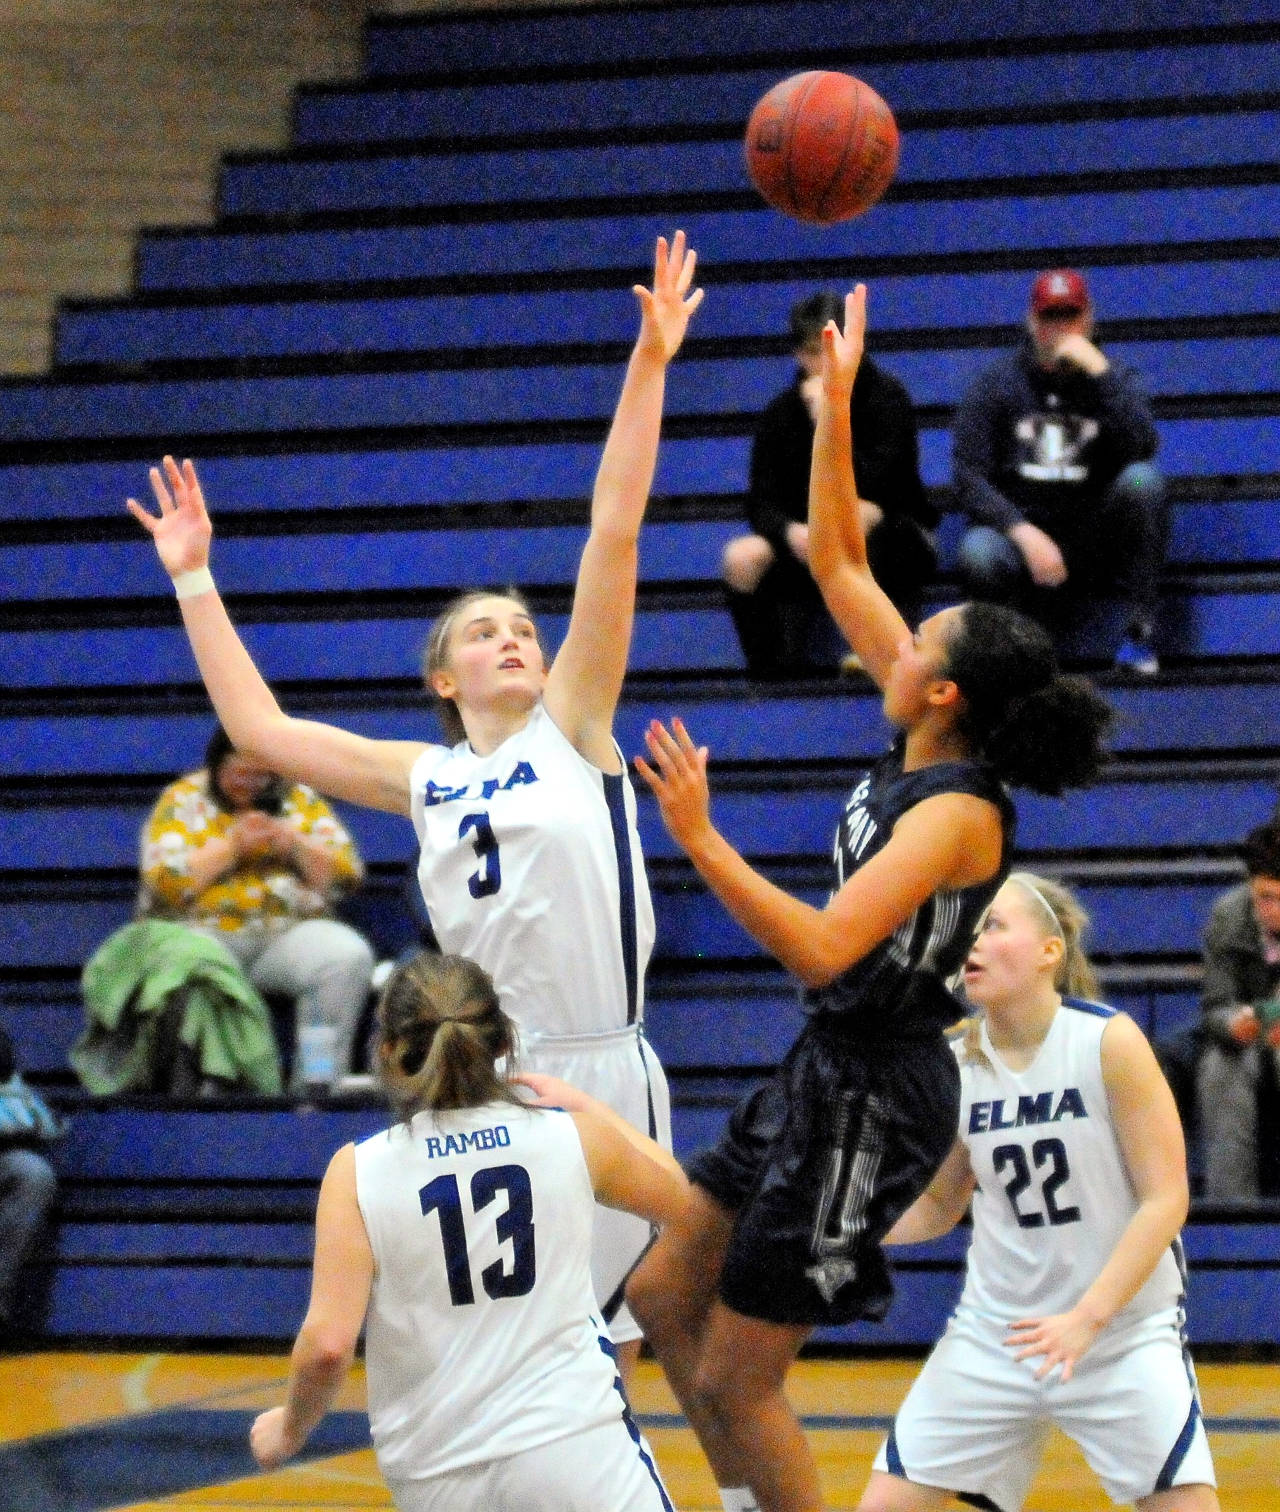 Elma’s Jalyn Sackrider, left, defends a shot from King’s Way Christian’s Mackenzie Ellerston in a game on Saturday. (Hasani Grayson | Grays Harbor News Group)